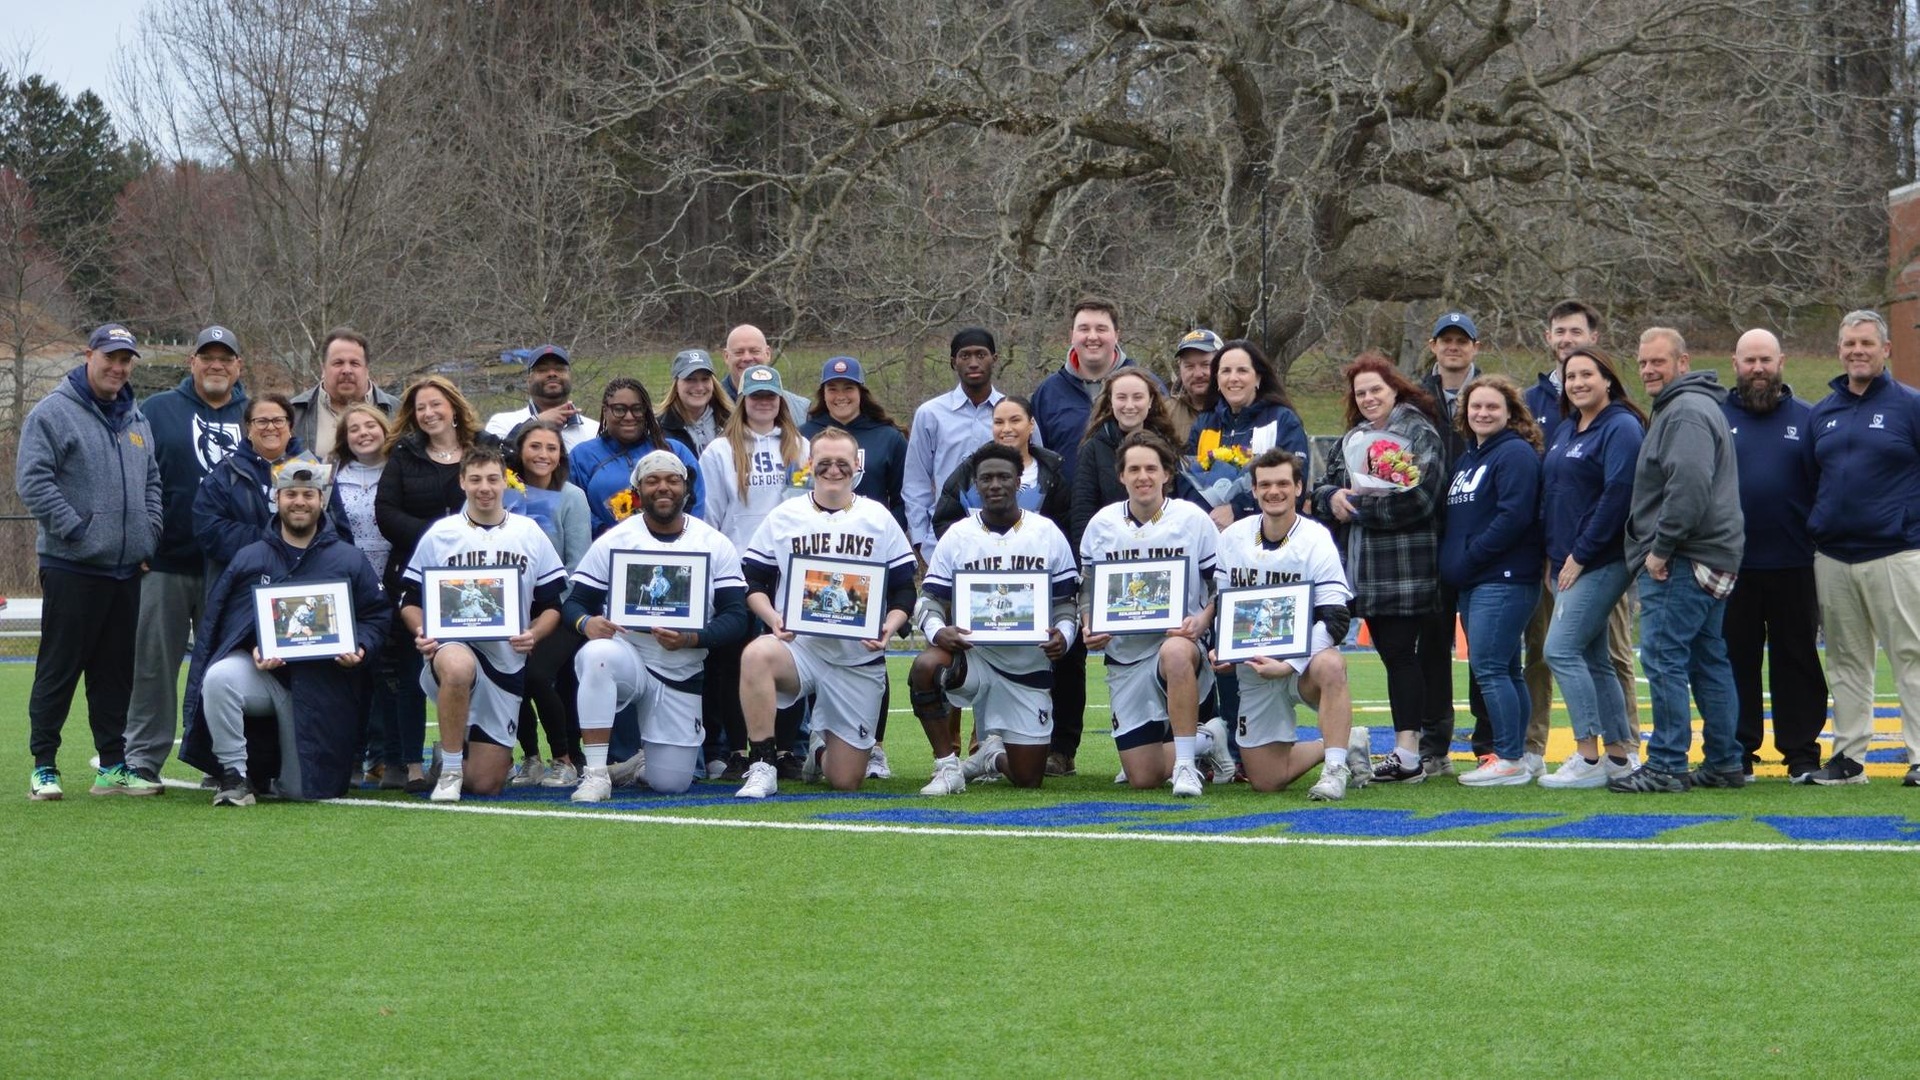 Men's Lacrosse Takes Down Regis, 9-2, During Senior Day Friday Afternoon